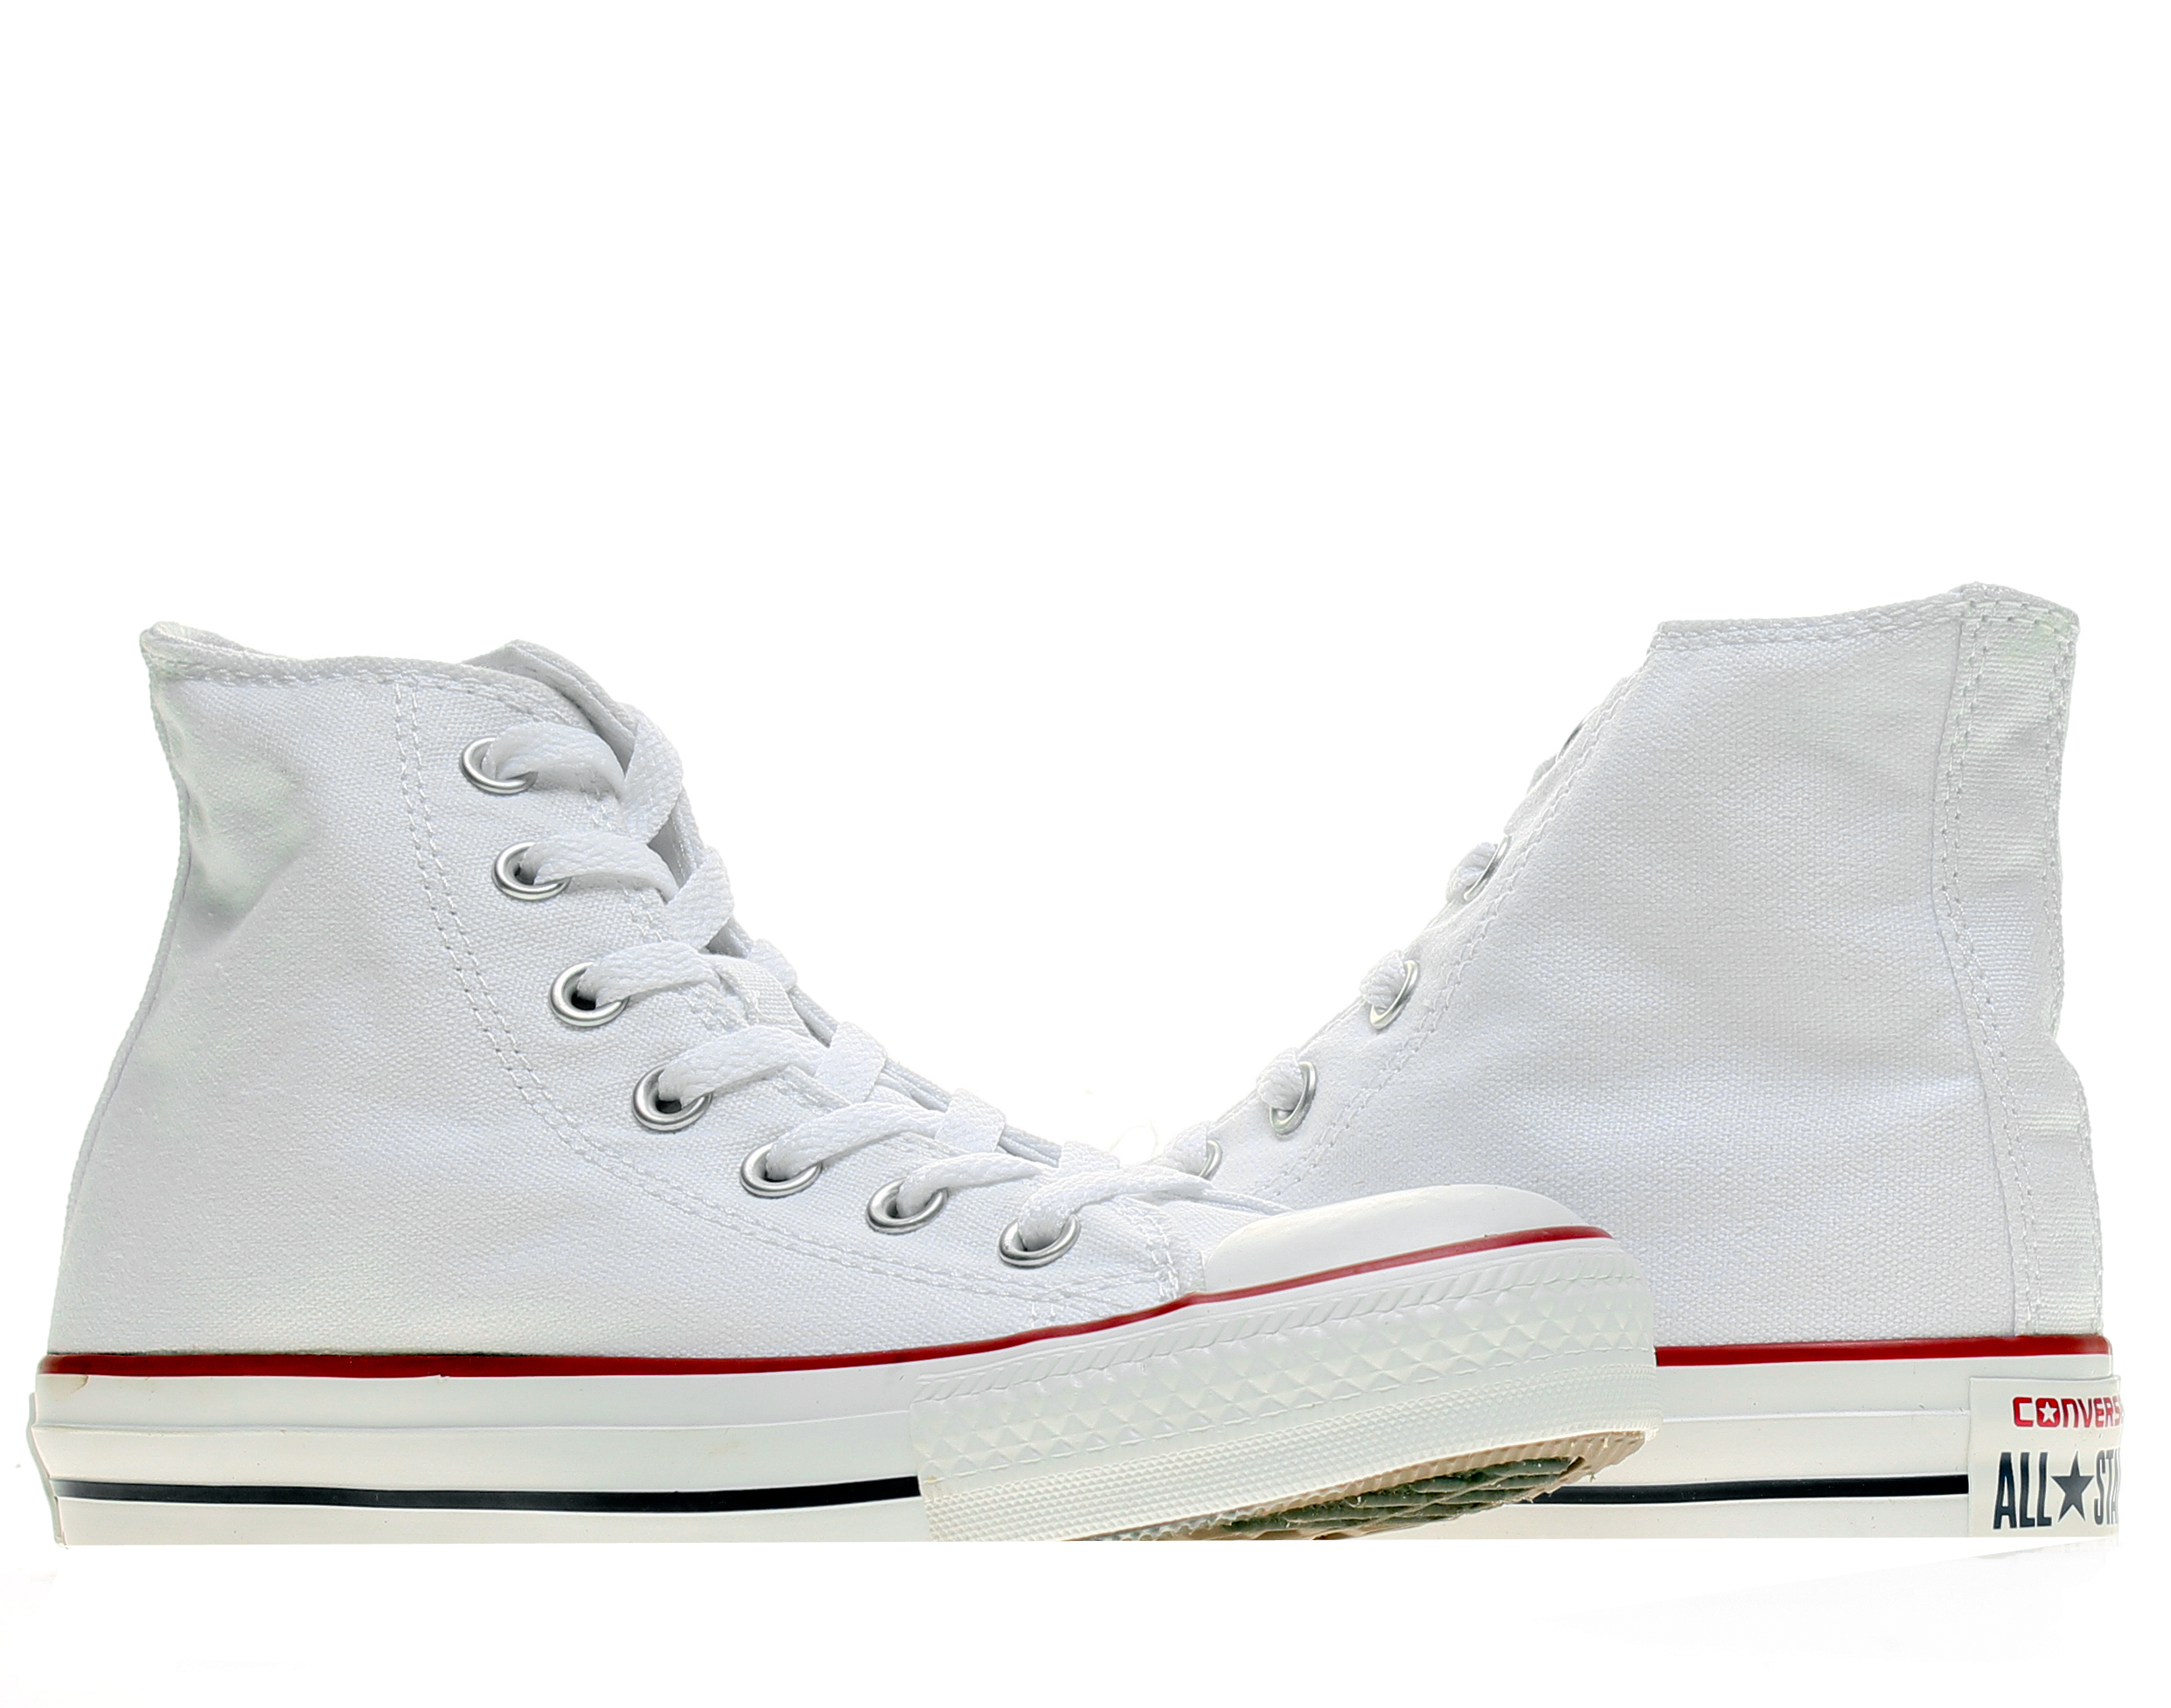 Converse Chuck Taylor All Star Hi Sneakers White - image 1 of 6